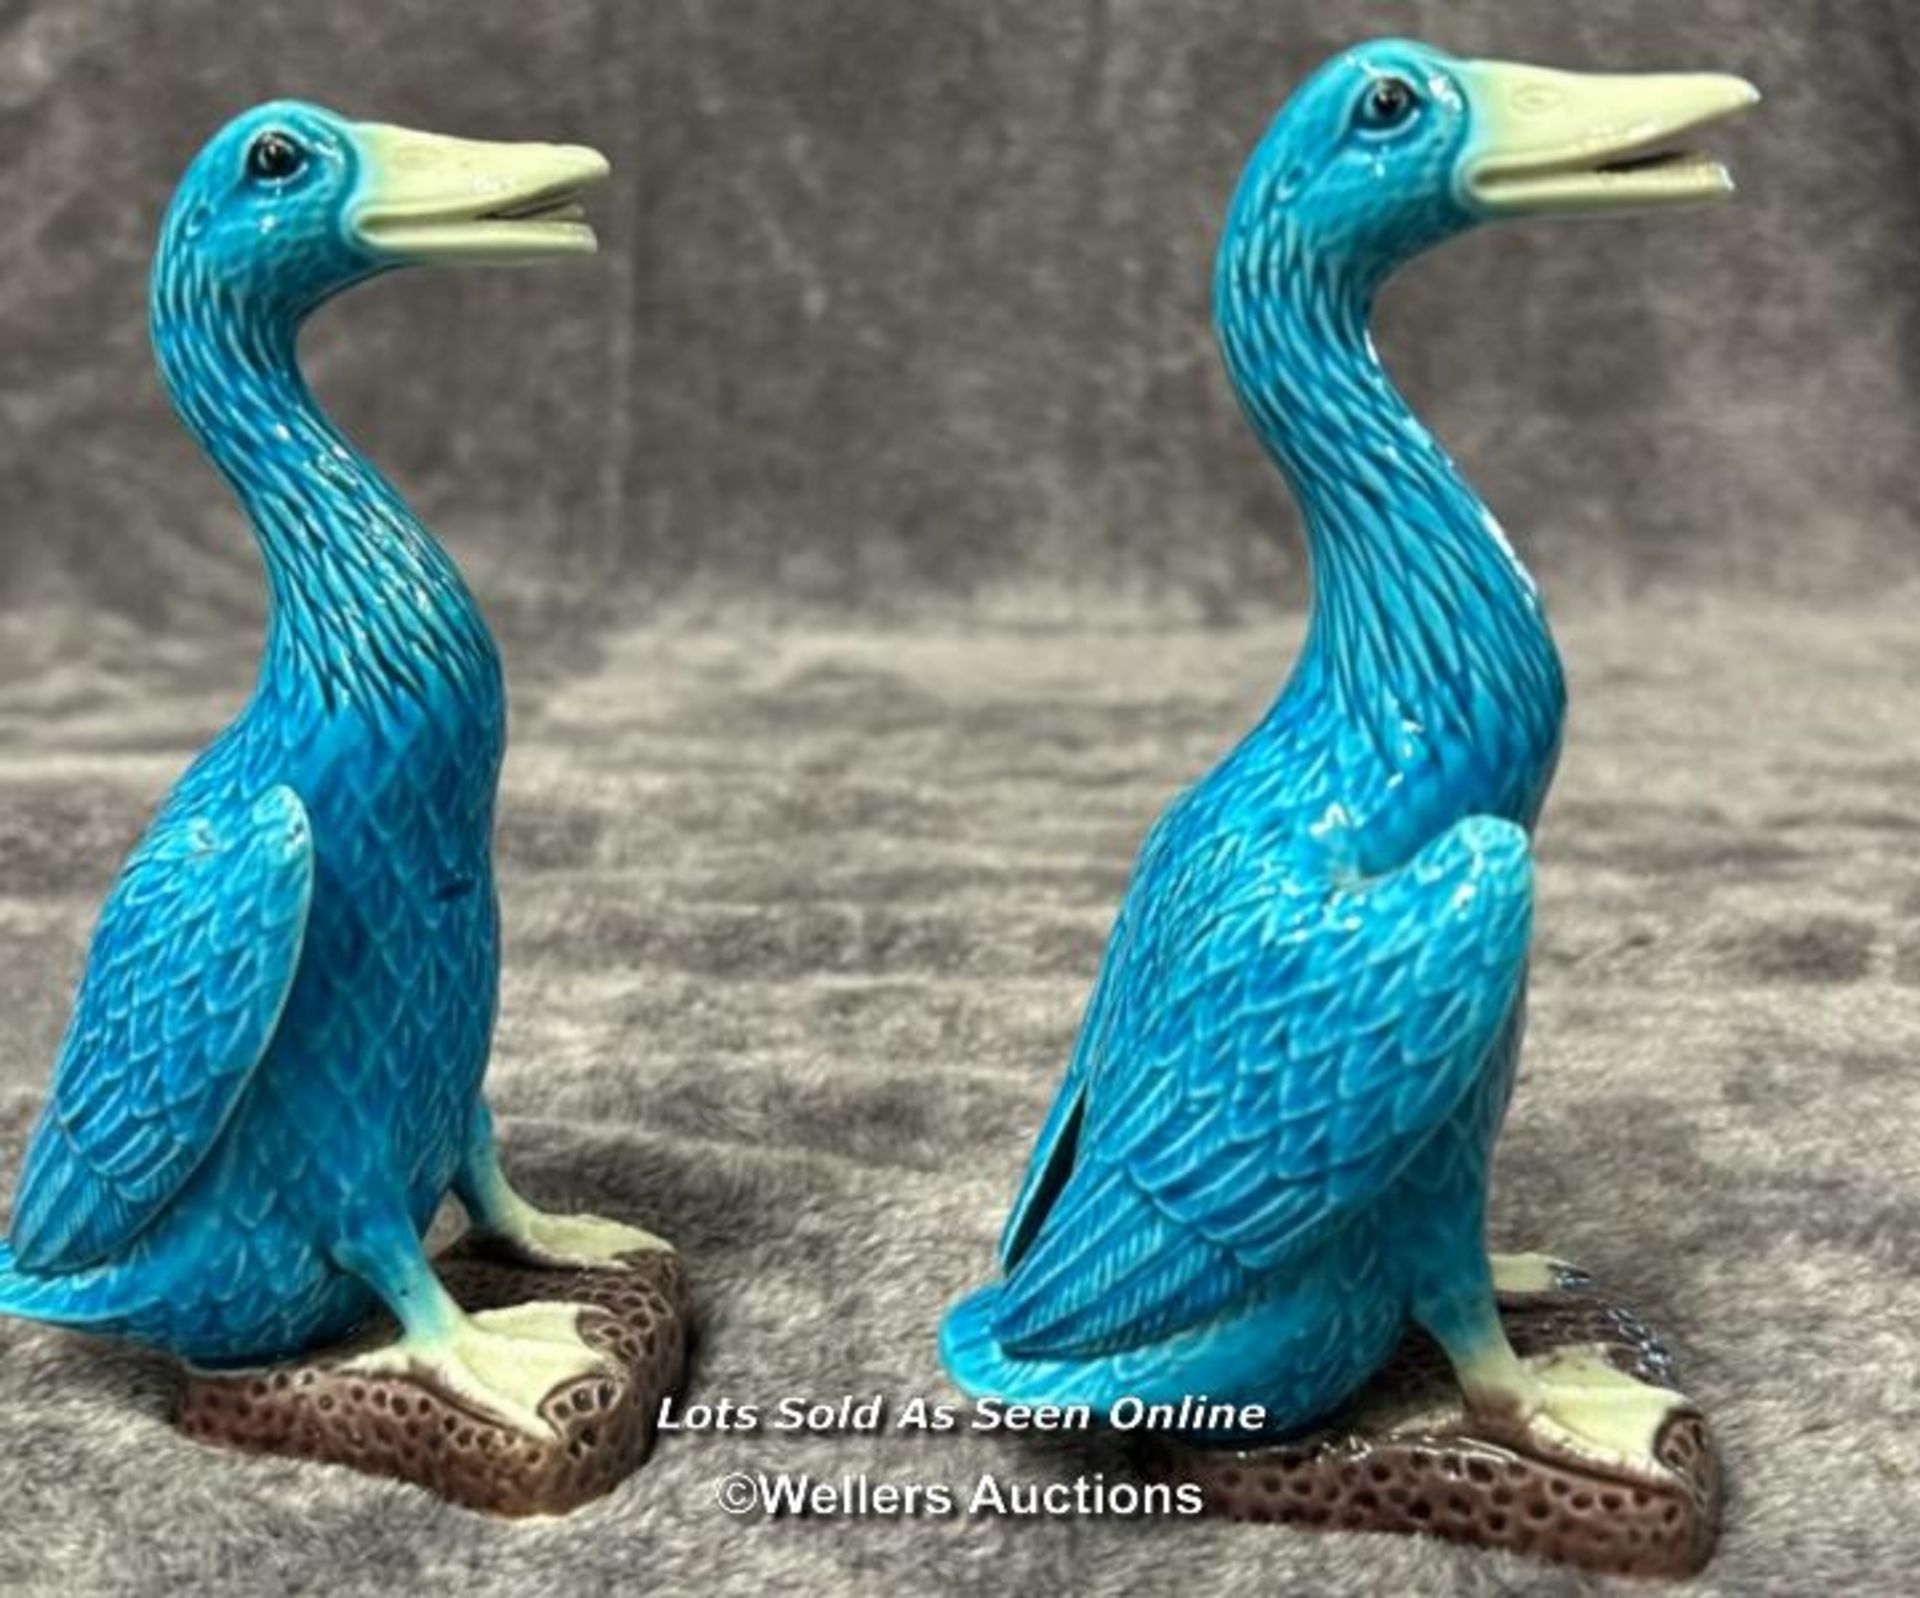 Set of six Chinese turquoise glazed porcelain duck figures, the tallest 29cm high / AN6 - Image 16 of 17